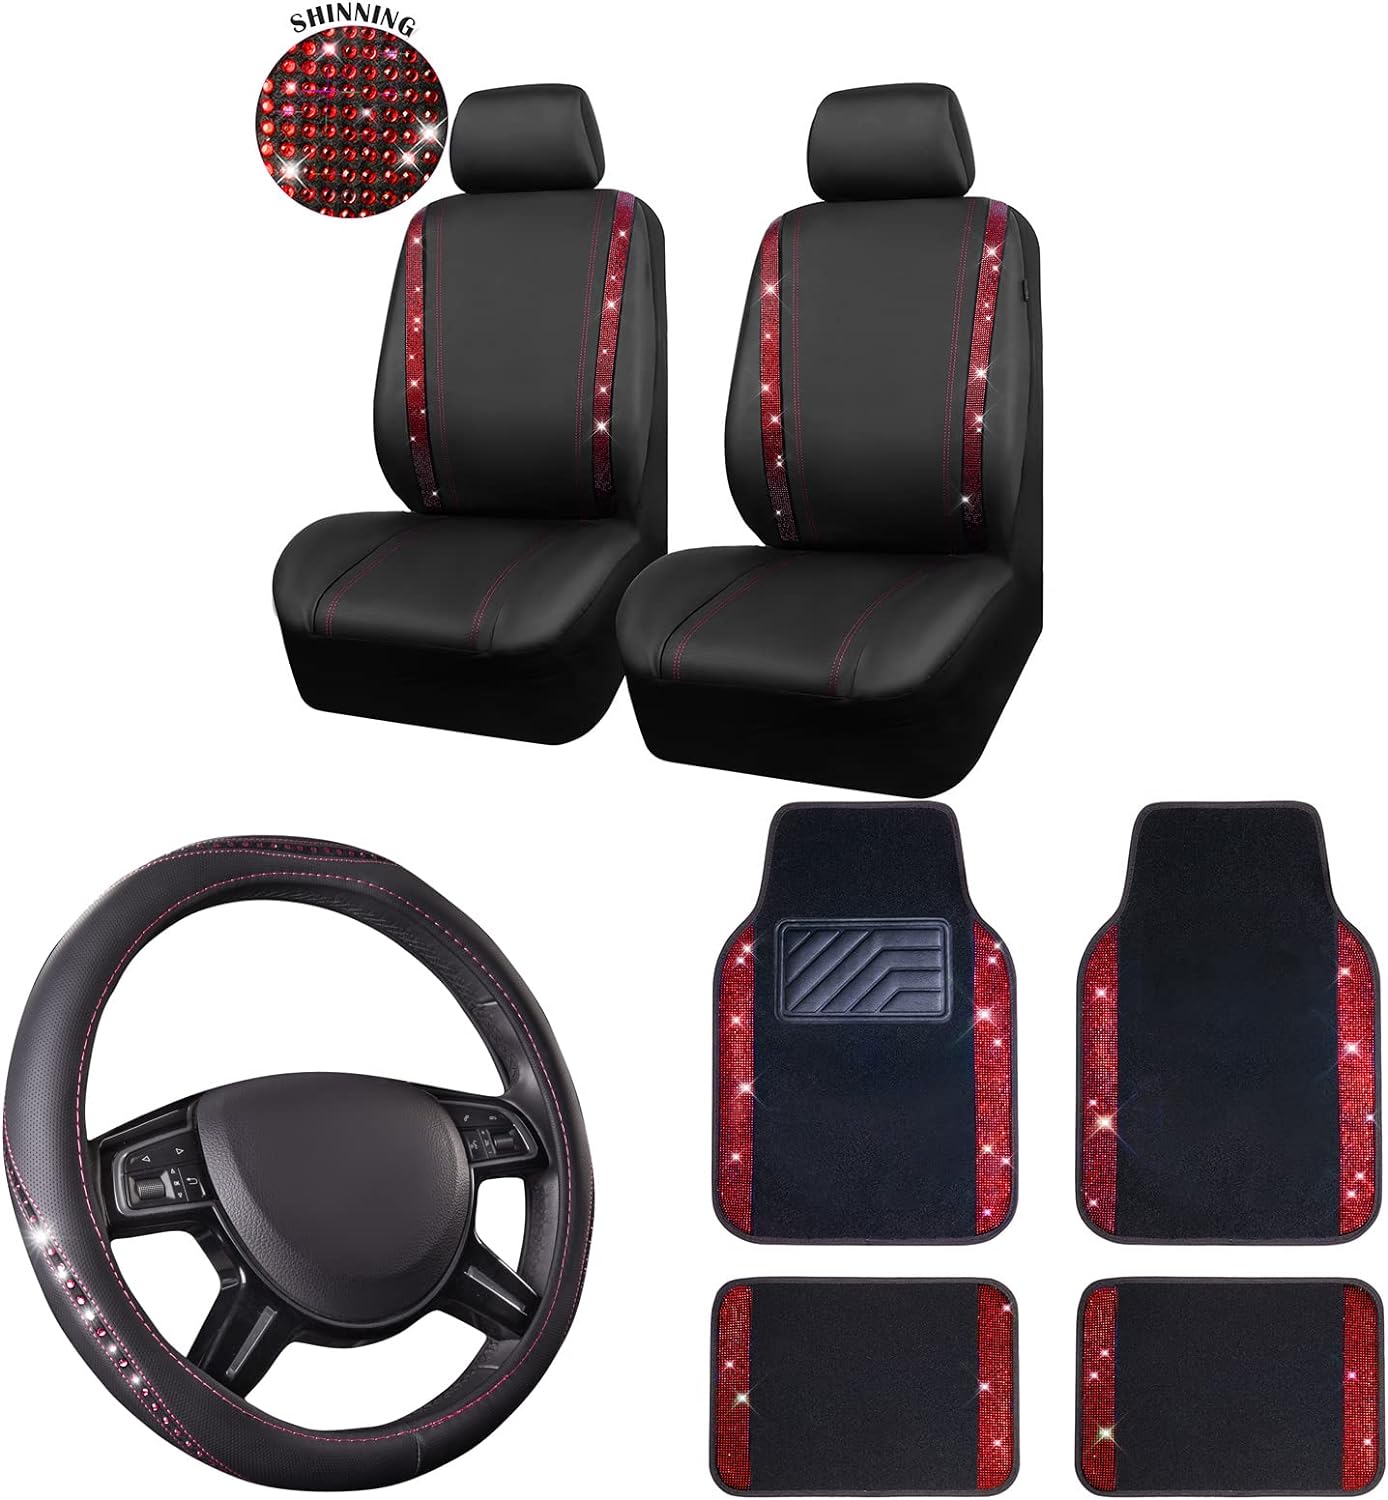 CAR PASS Bling Diamond Car Floor Mats & Car Steering Wheel Cover & Car Seat Cover Two Front Seats